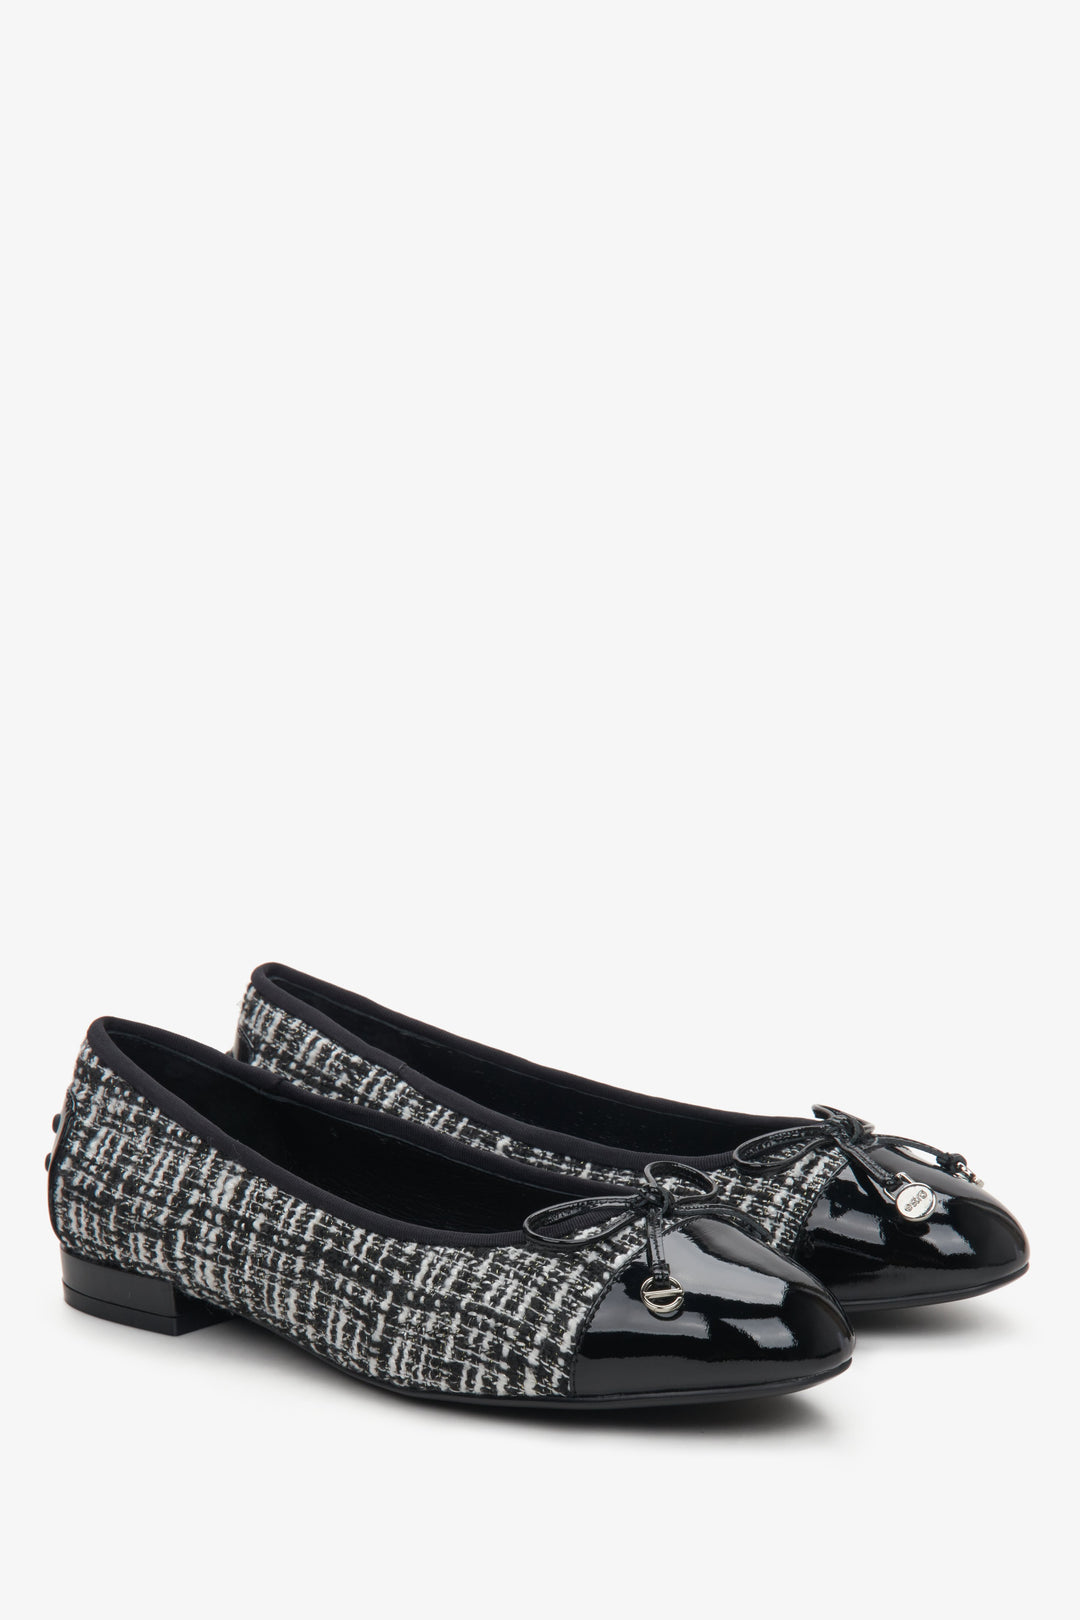 Women's black and white ballet flats made of combined materials with a bow by Estro.